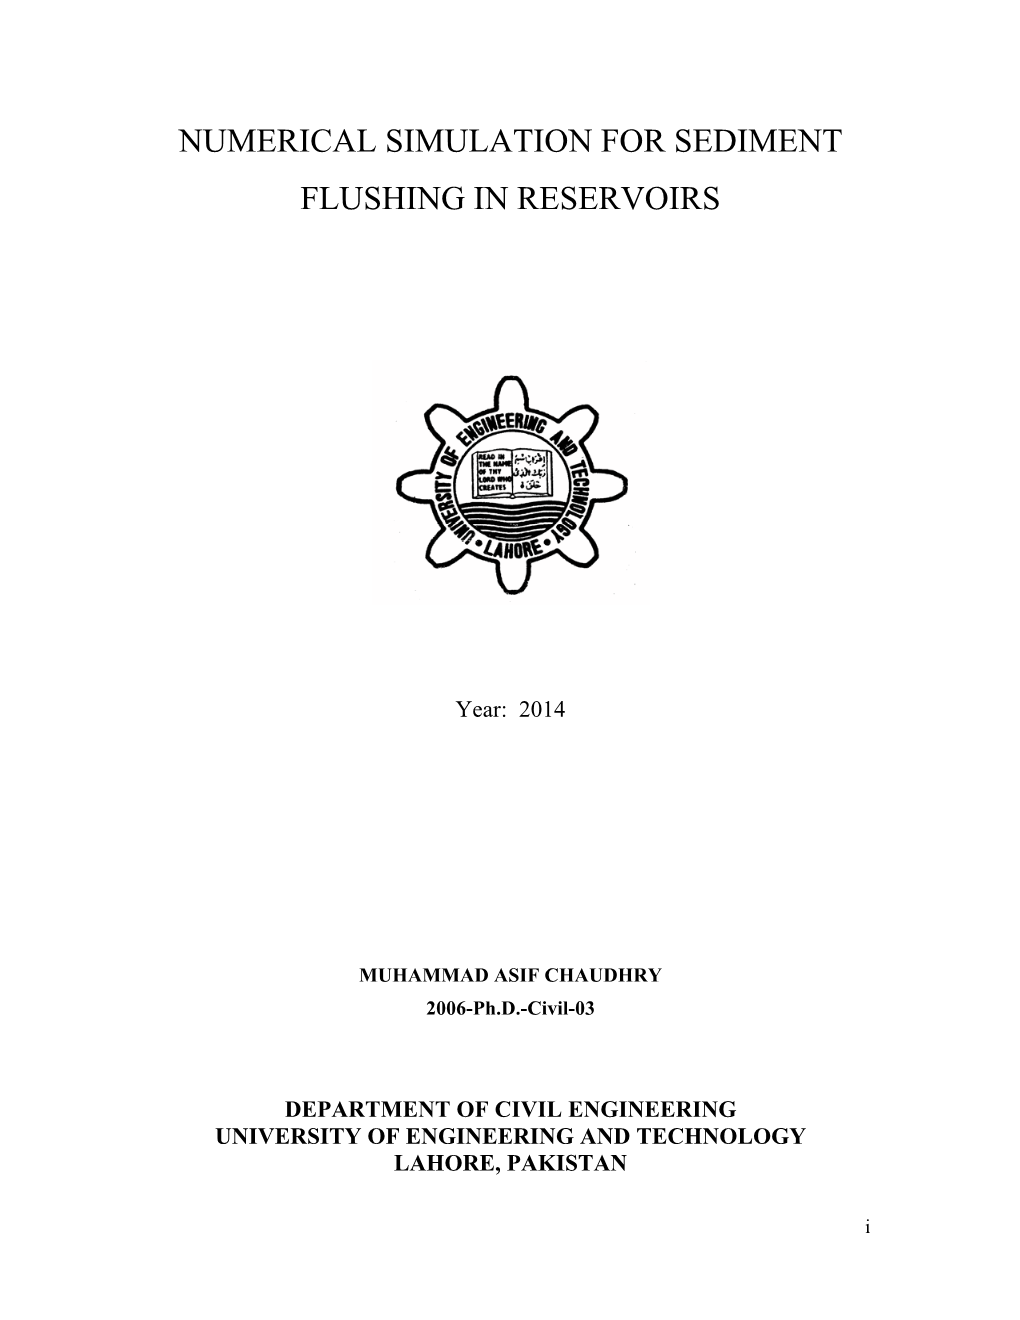 Numerical Simulation for Sediment Flushing in Reservoirs